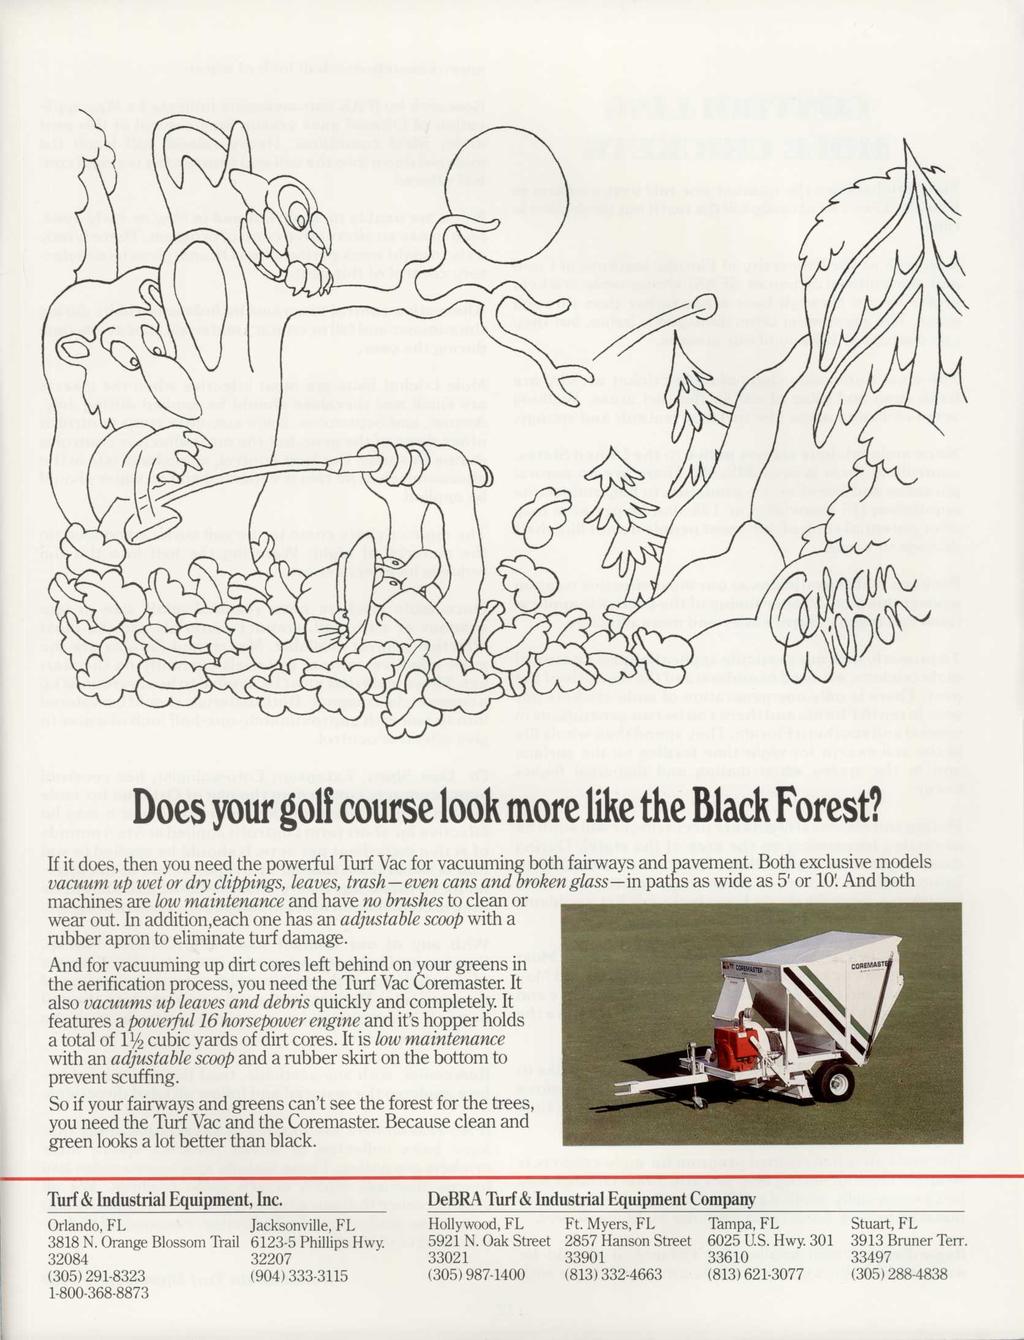 Does your golf course look more like the Black Forest? If it does, then you need the powerful Turf Vac for vacuuming both fairways and pavement.